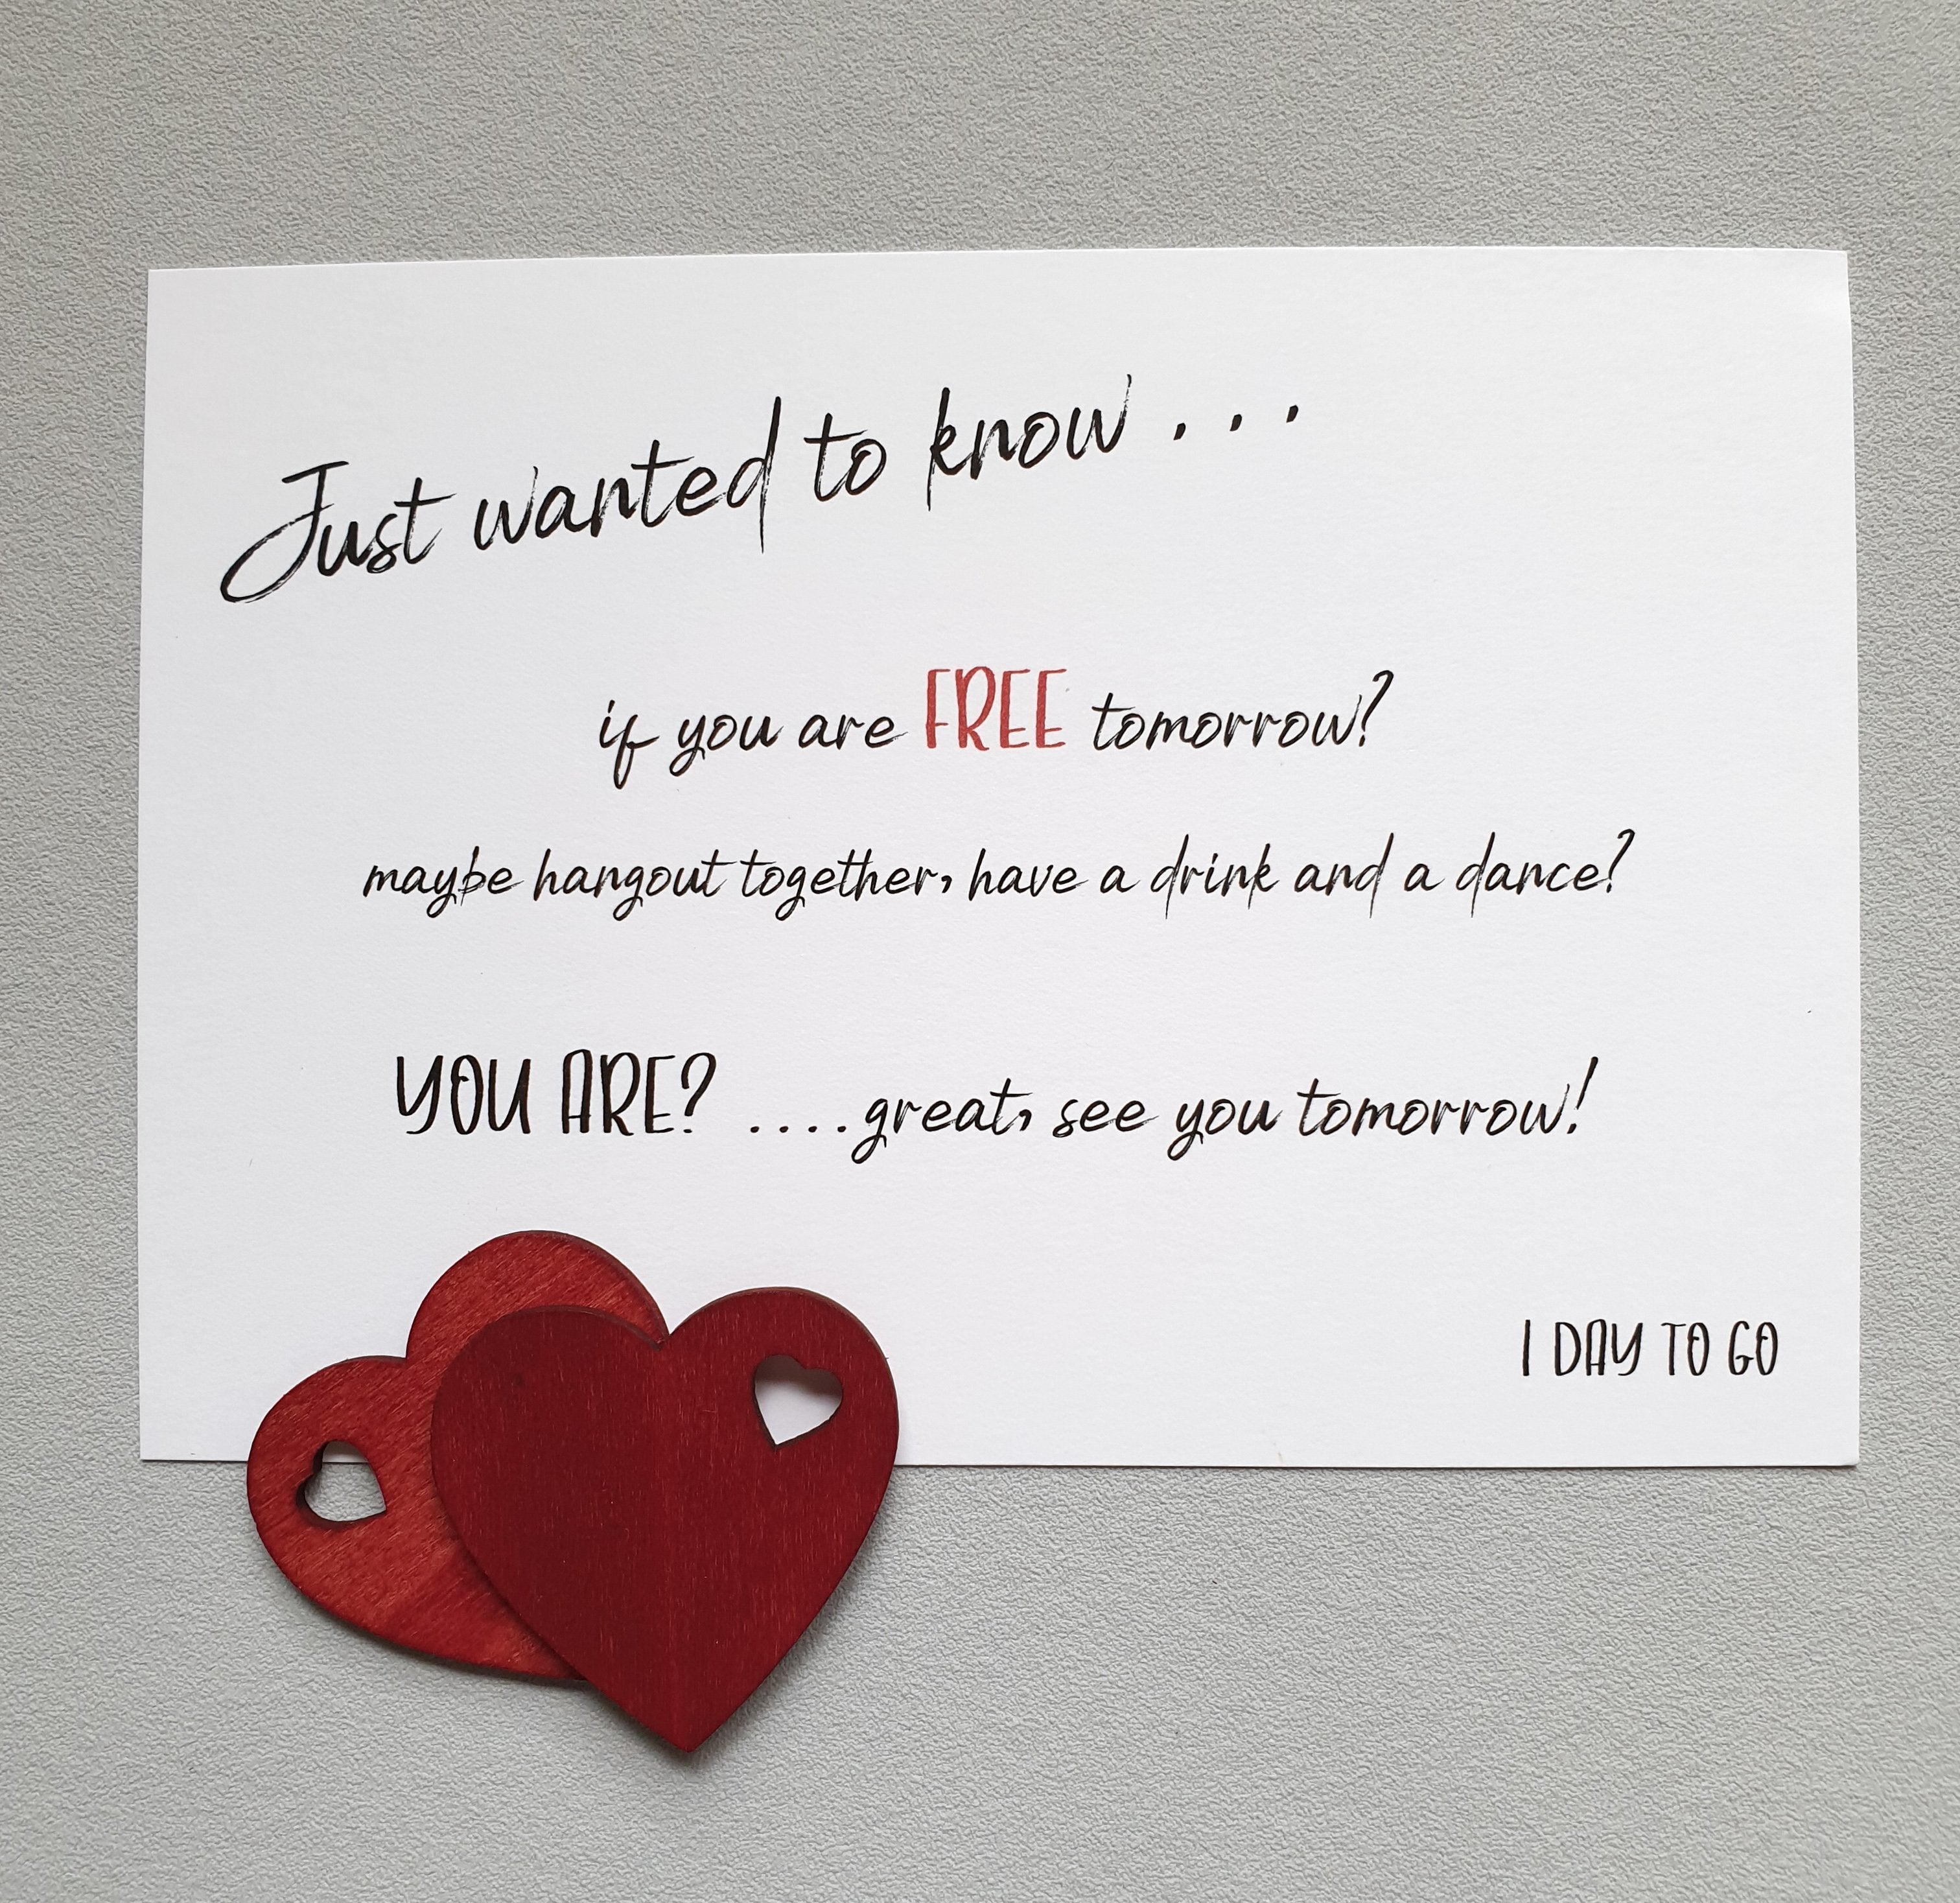 The '1 day to go' A6 Poppleberry wedding countdown postcard on white cardstock with funny / romantic message.